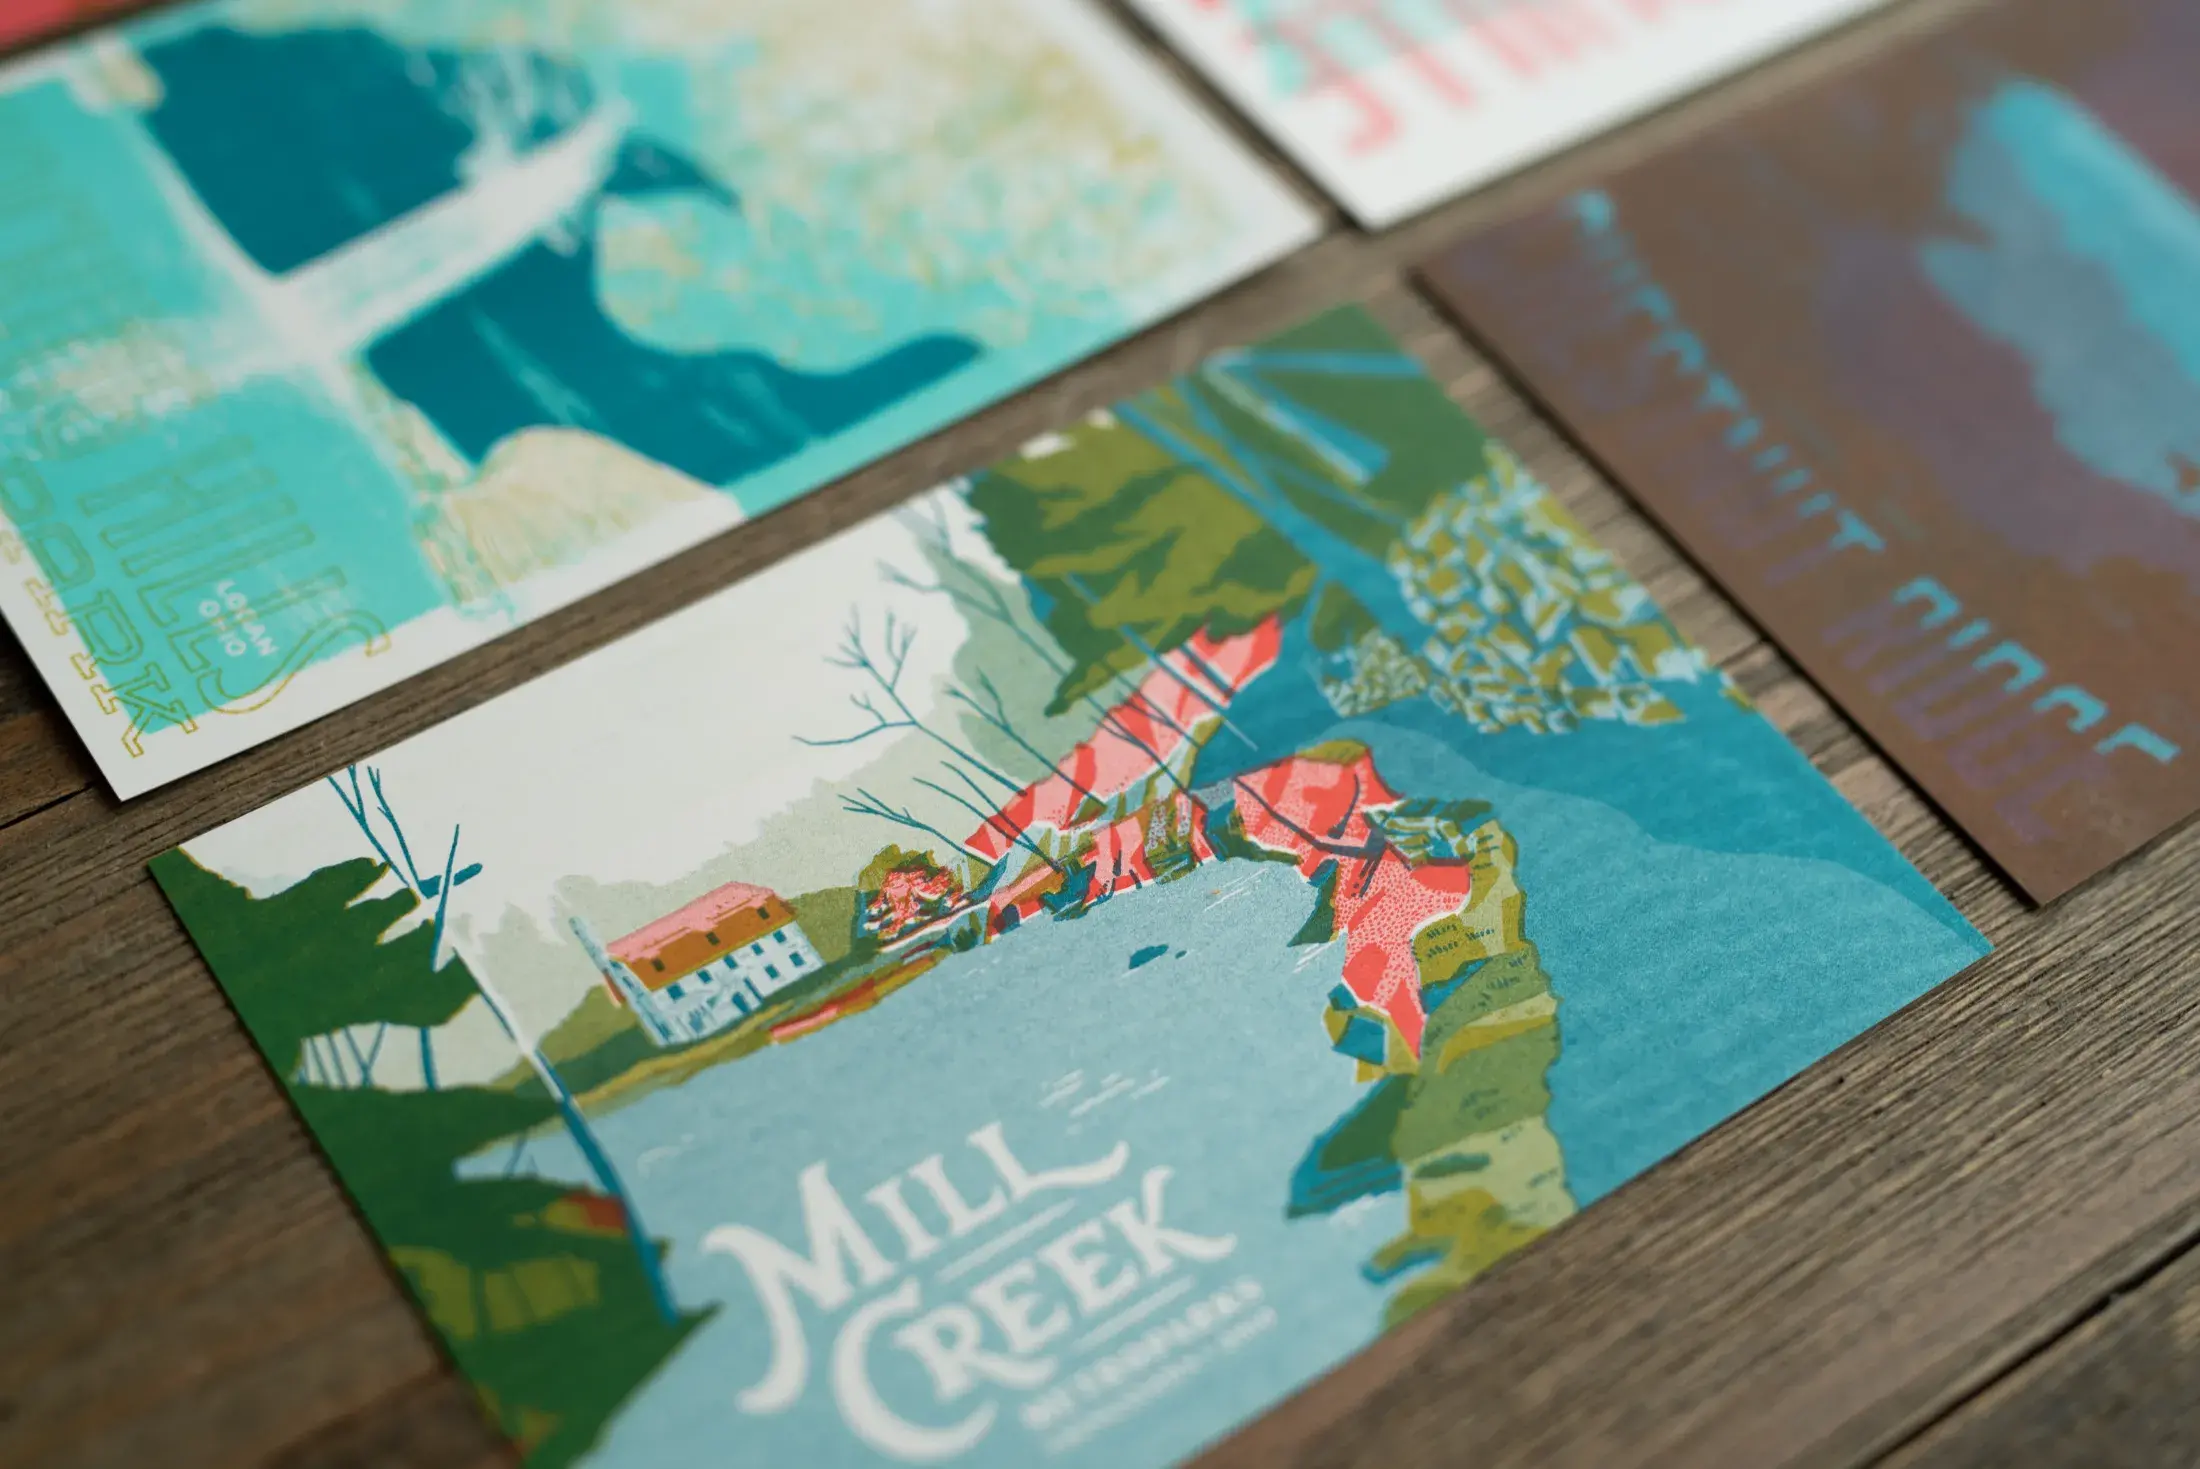 Closeup of the Mill Creek Park postcard with other cards surrounding